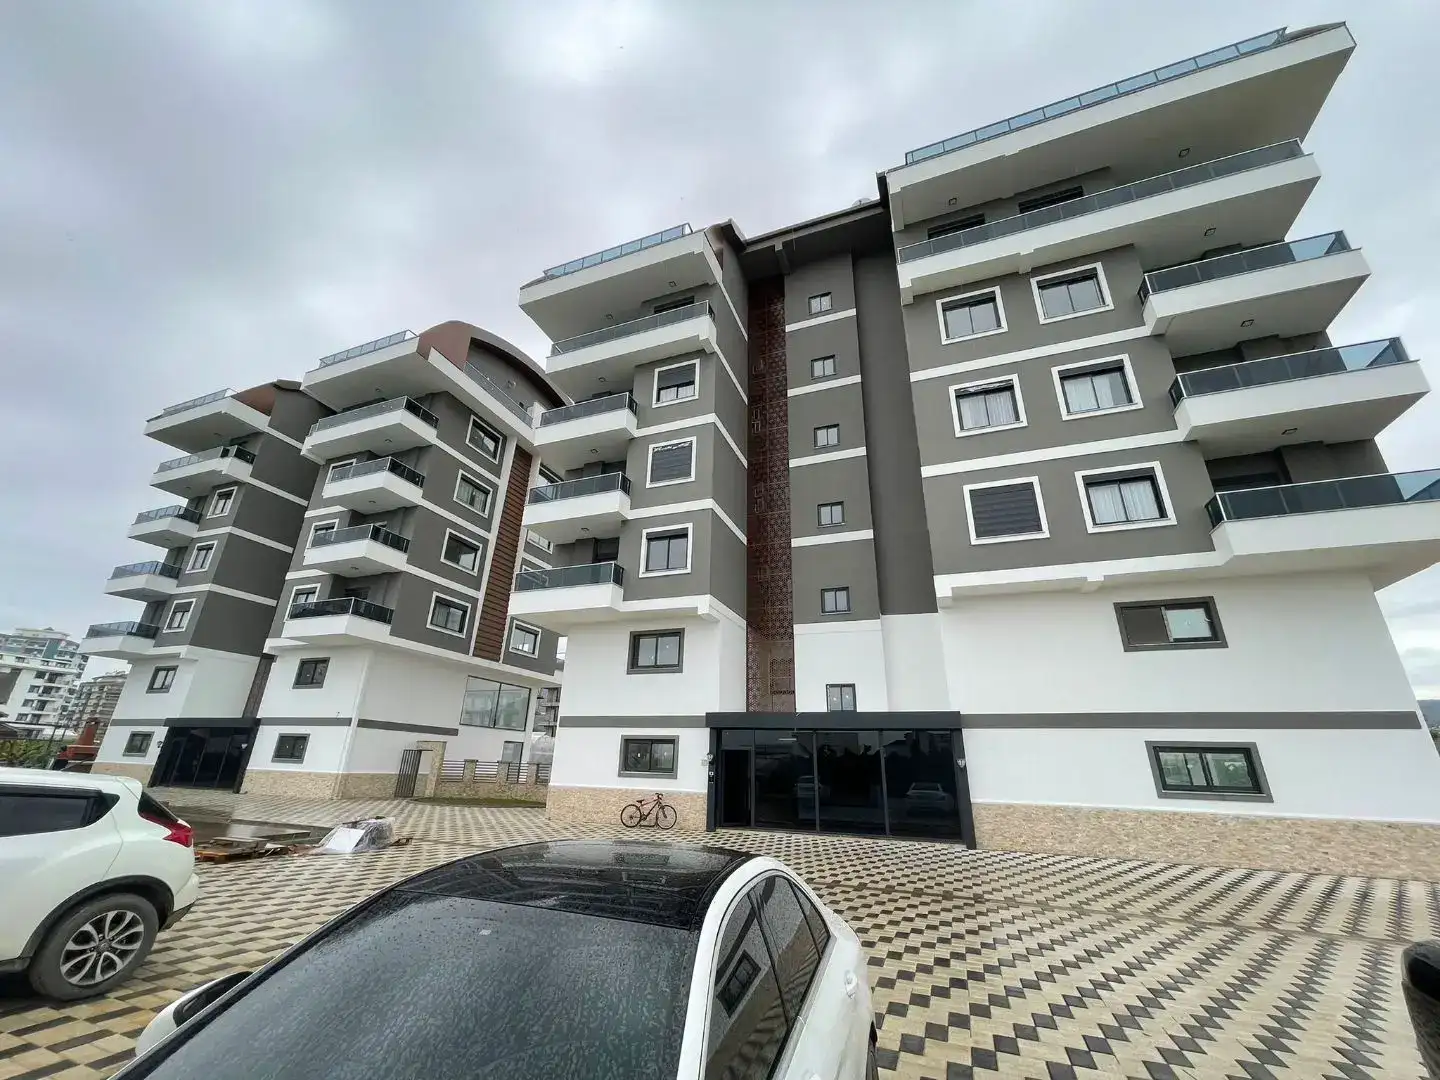 4+1 NEWLY BUİLT DUPLEX FOR SALE İN KARGICAK- 150 METERS FROM THE SEA 